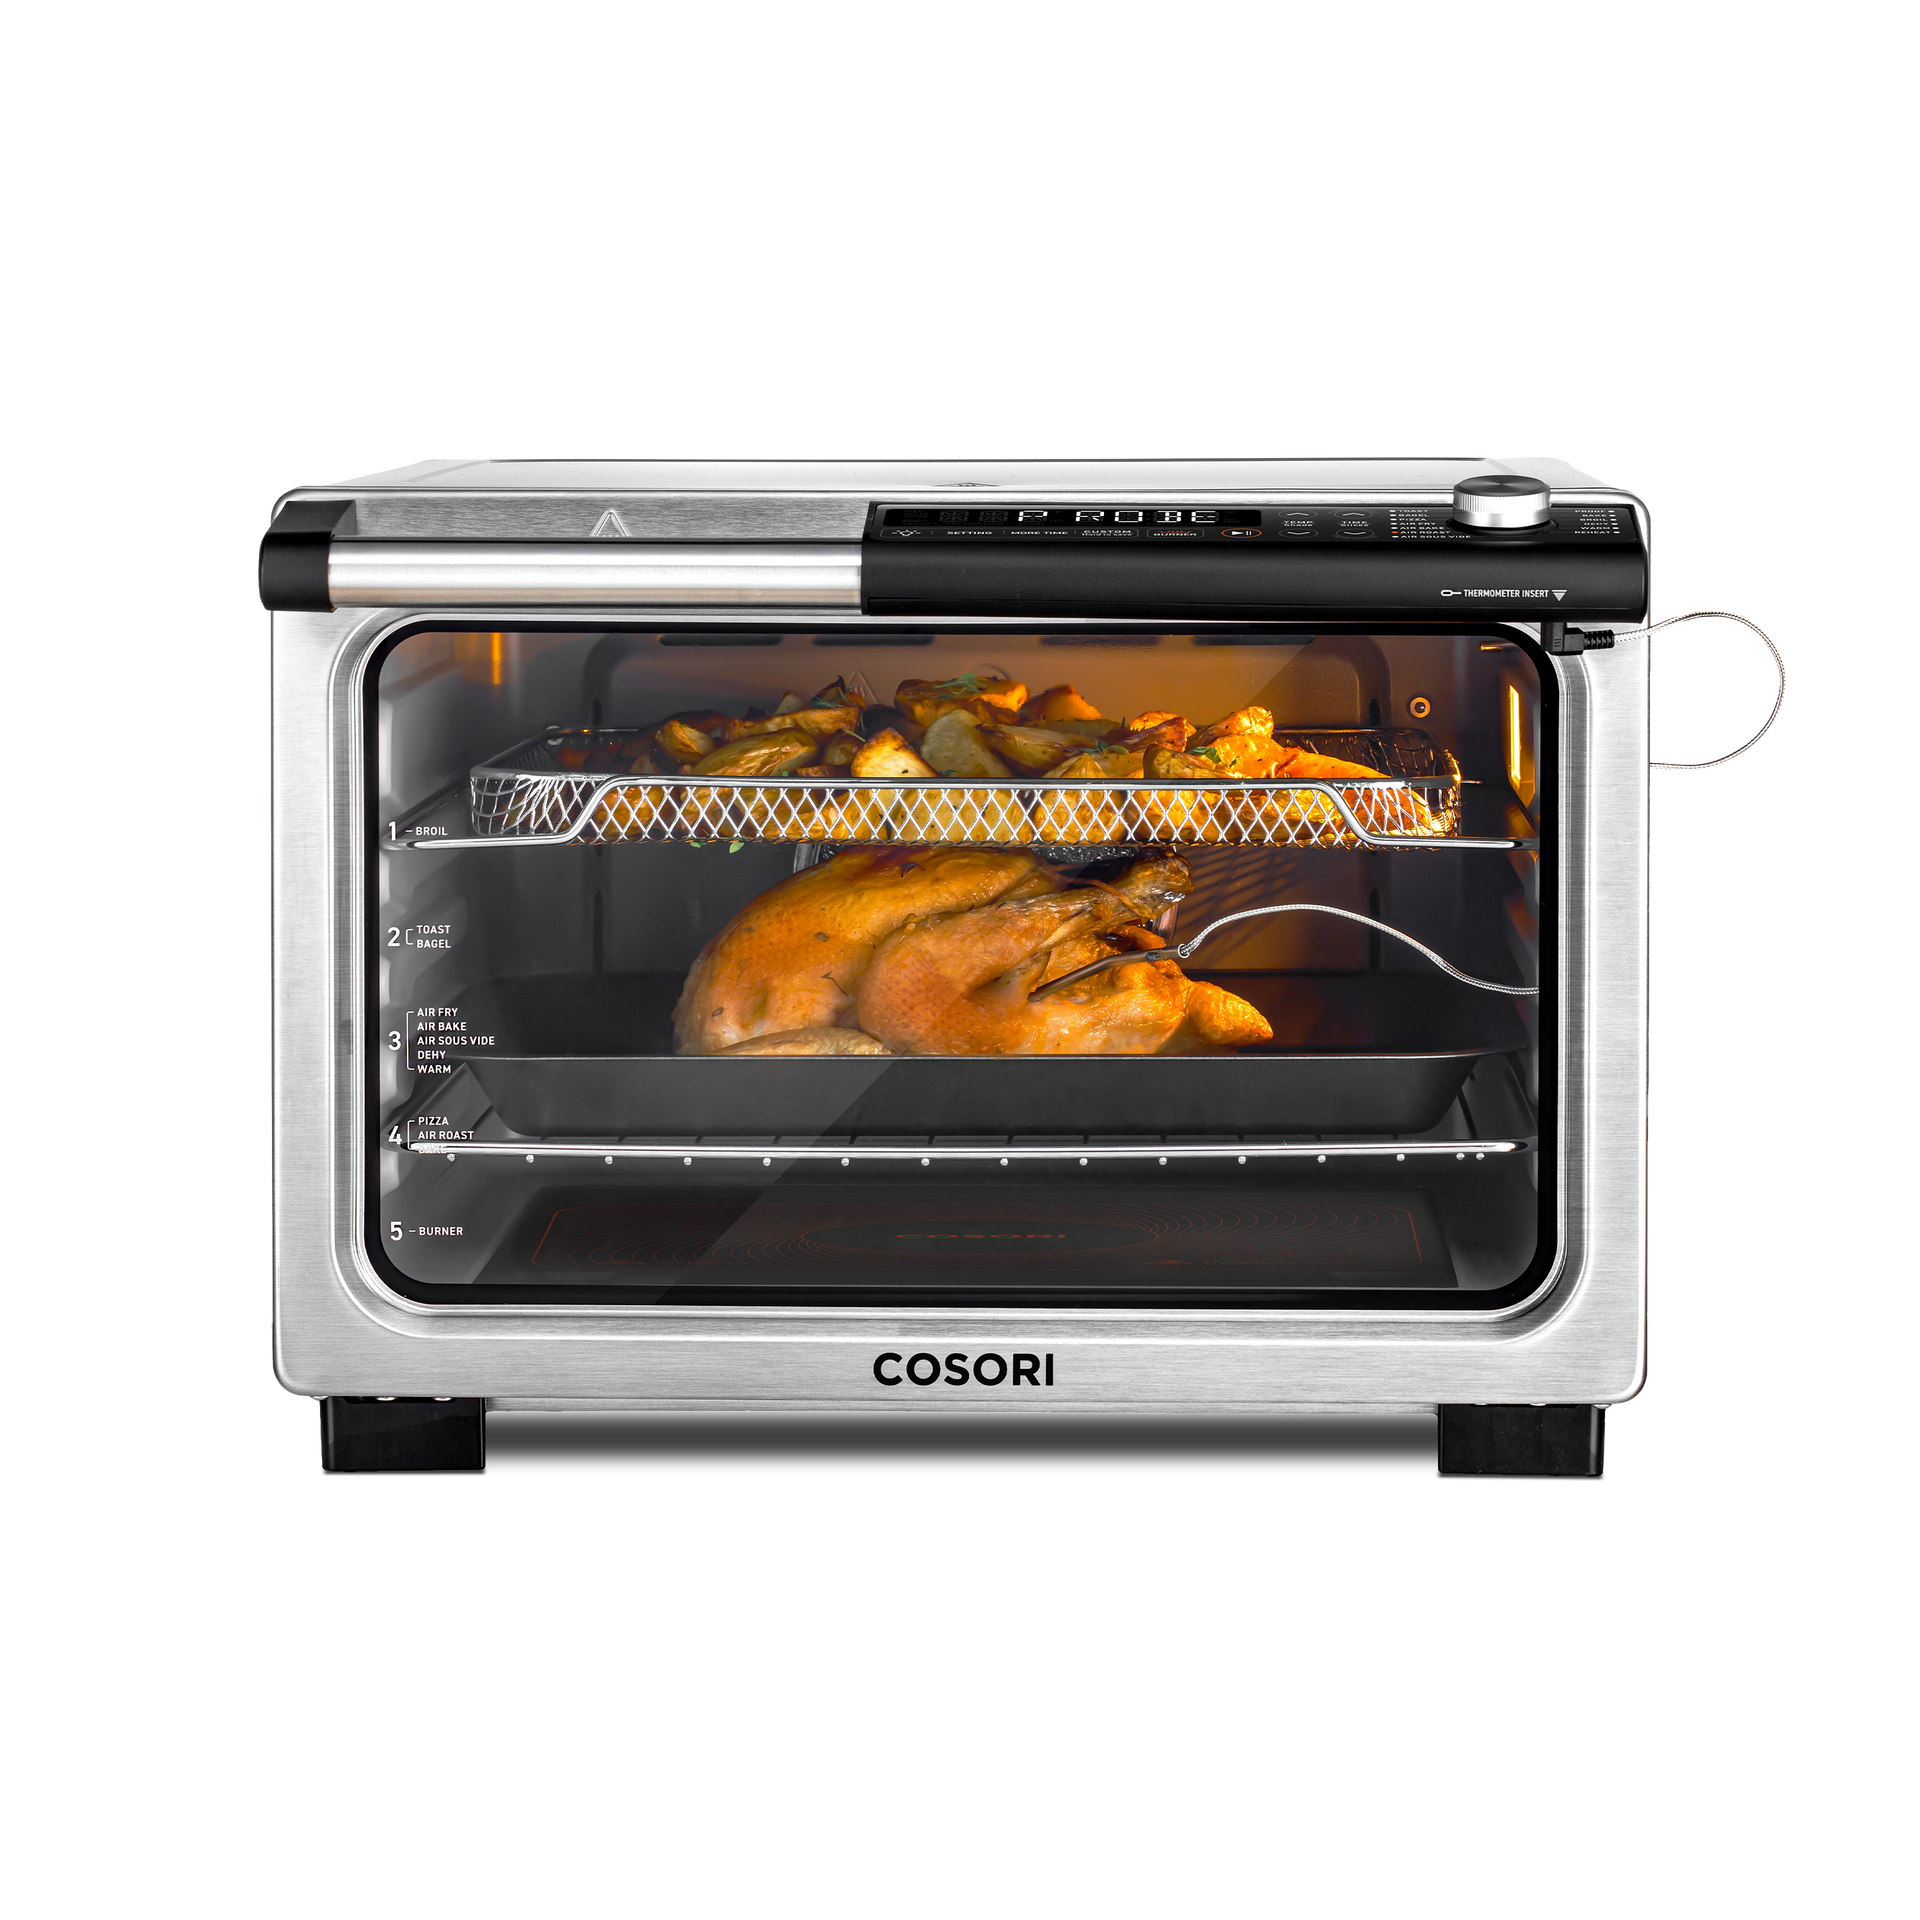 Cosori Air Fryer Toaster Oven Food Tray, Accessories for Bake and Roast, Non-Stick Coating & Dishwasher Safe, 132 x 11 x 11 Inches, Cto-ft201-kus